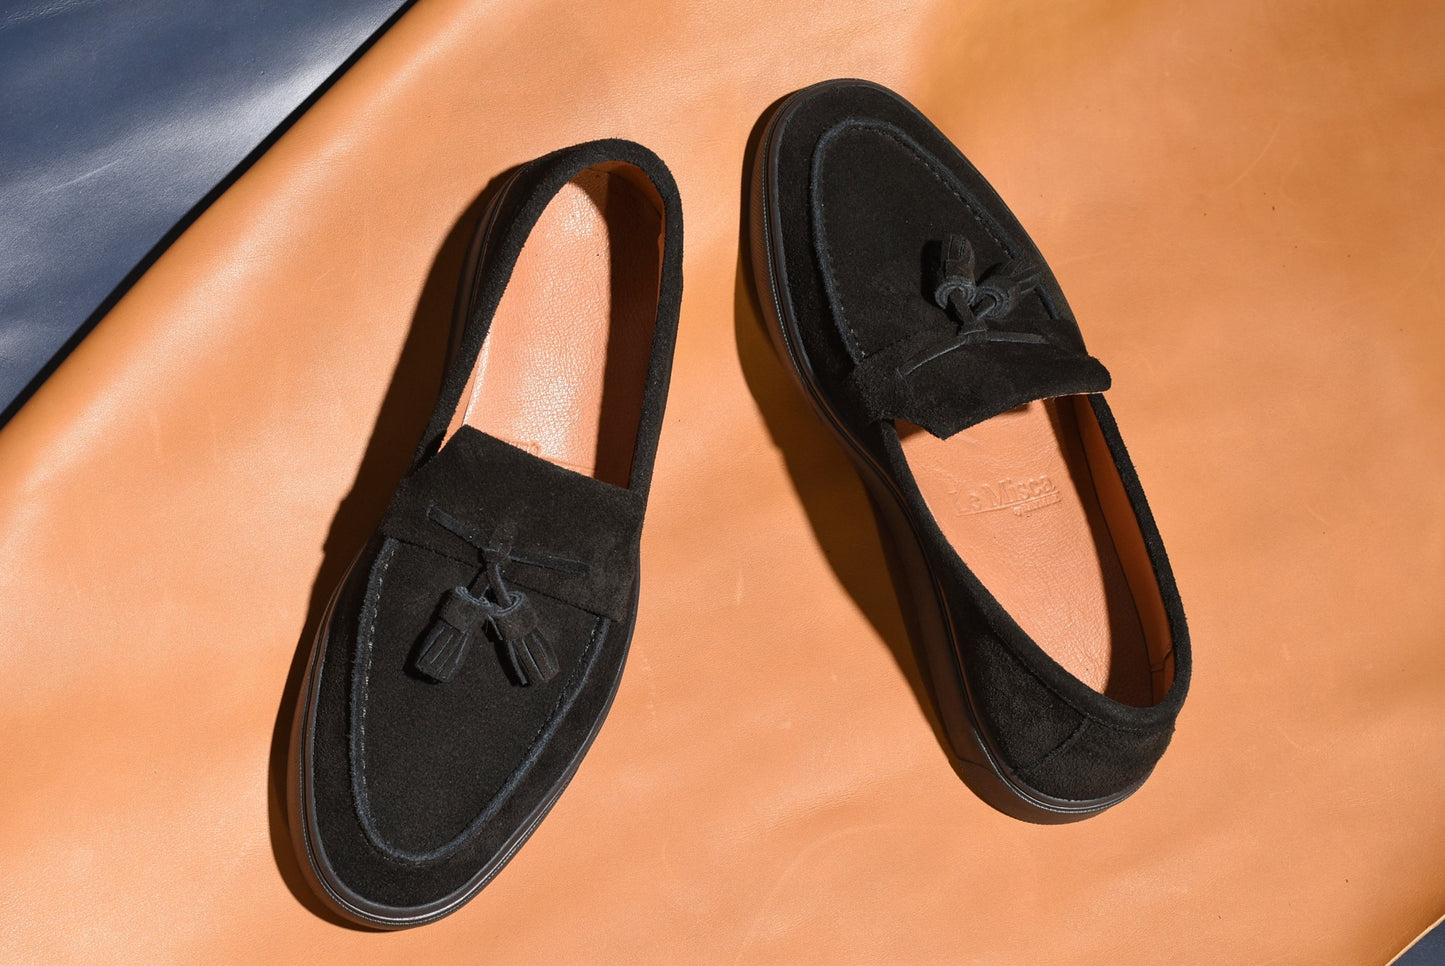 “Sirius” Tasseled Loafer, Black Comfort Shoes, Vibram Cup Sole, US size 5 1/2 ~ 10